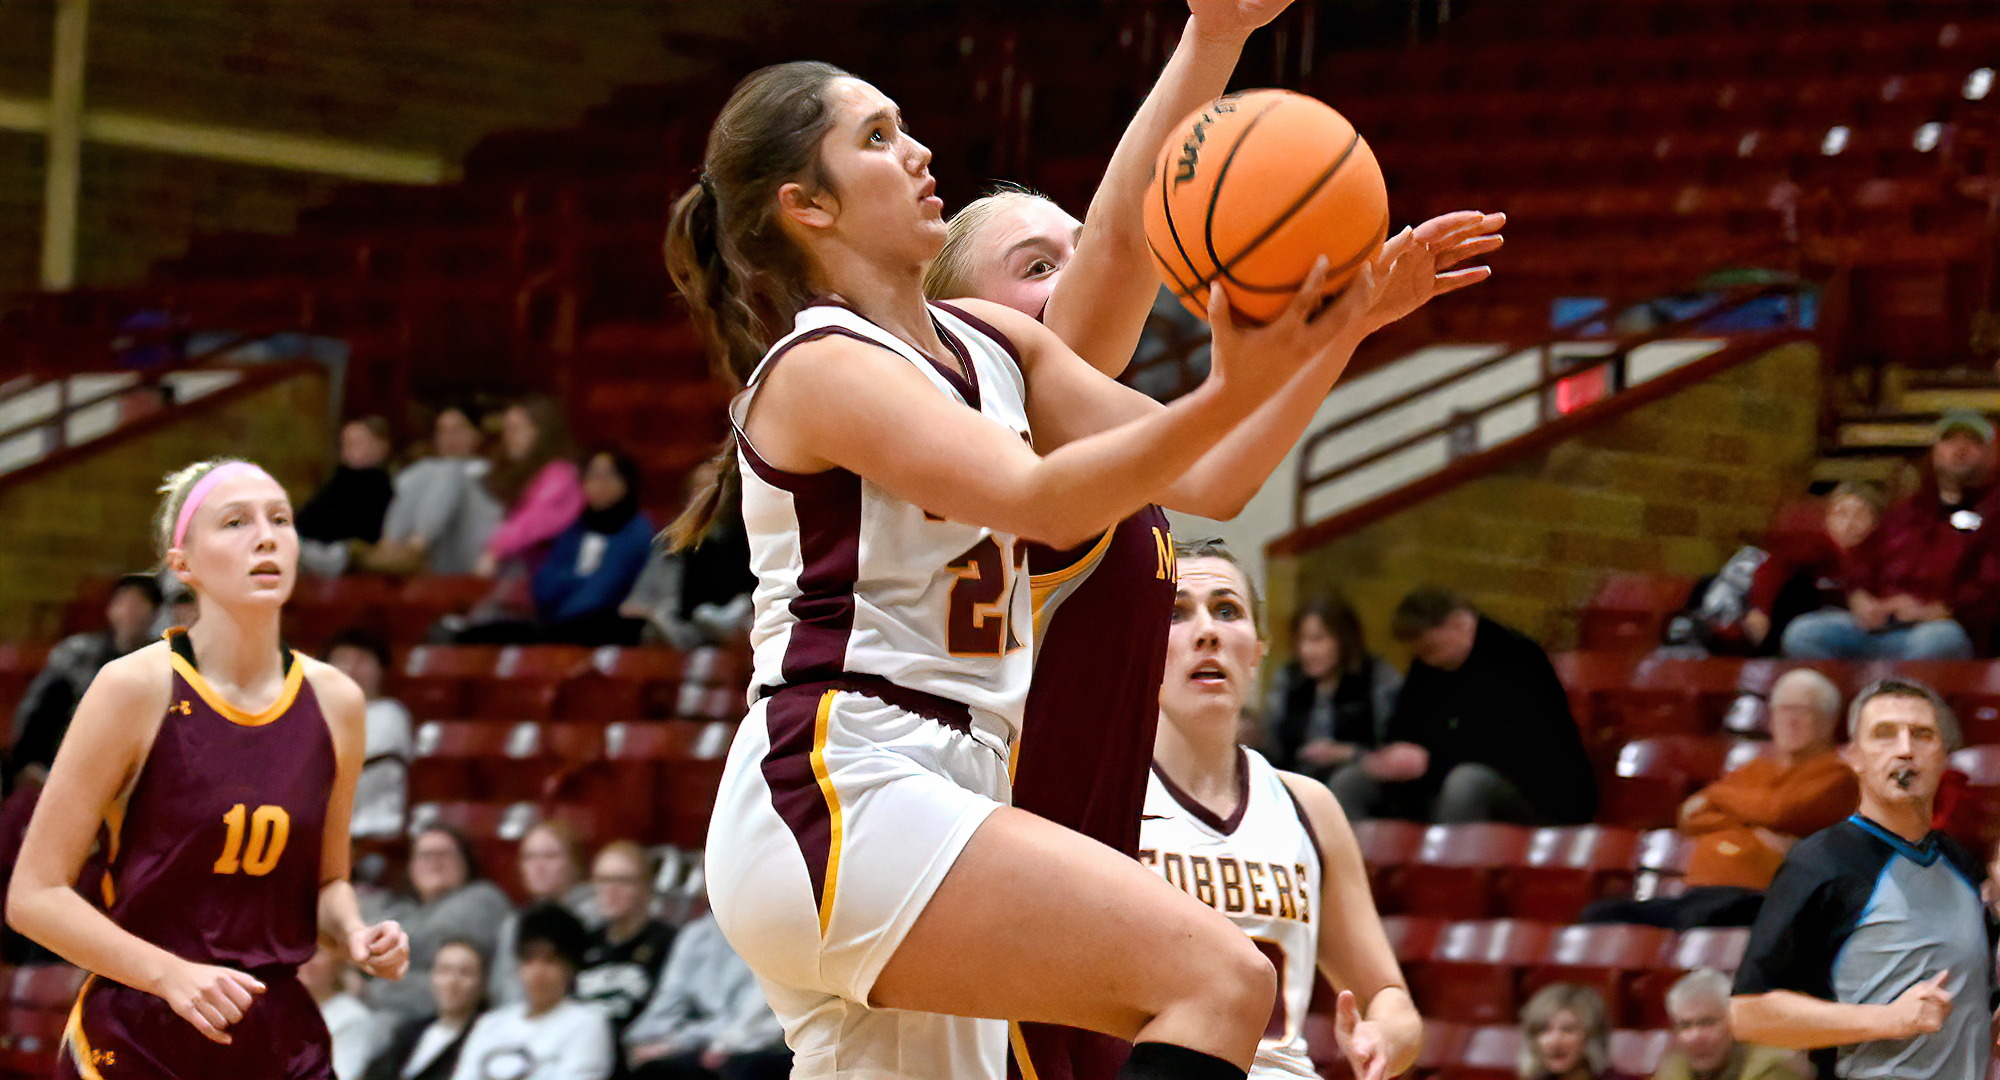 Junior Makayla Anderson led Concordia with 18 points and added eight rebounds in the Cobbers' game at Wis.-Stevens Point.